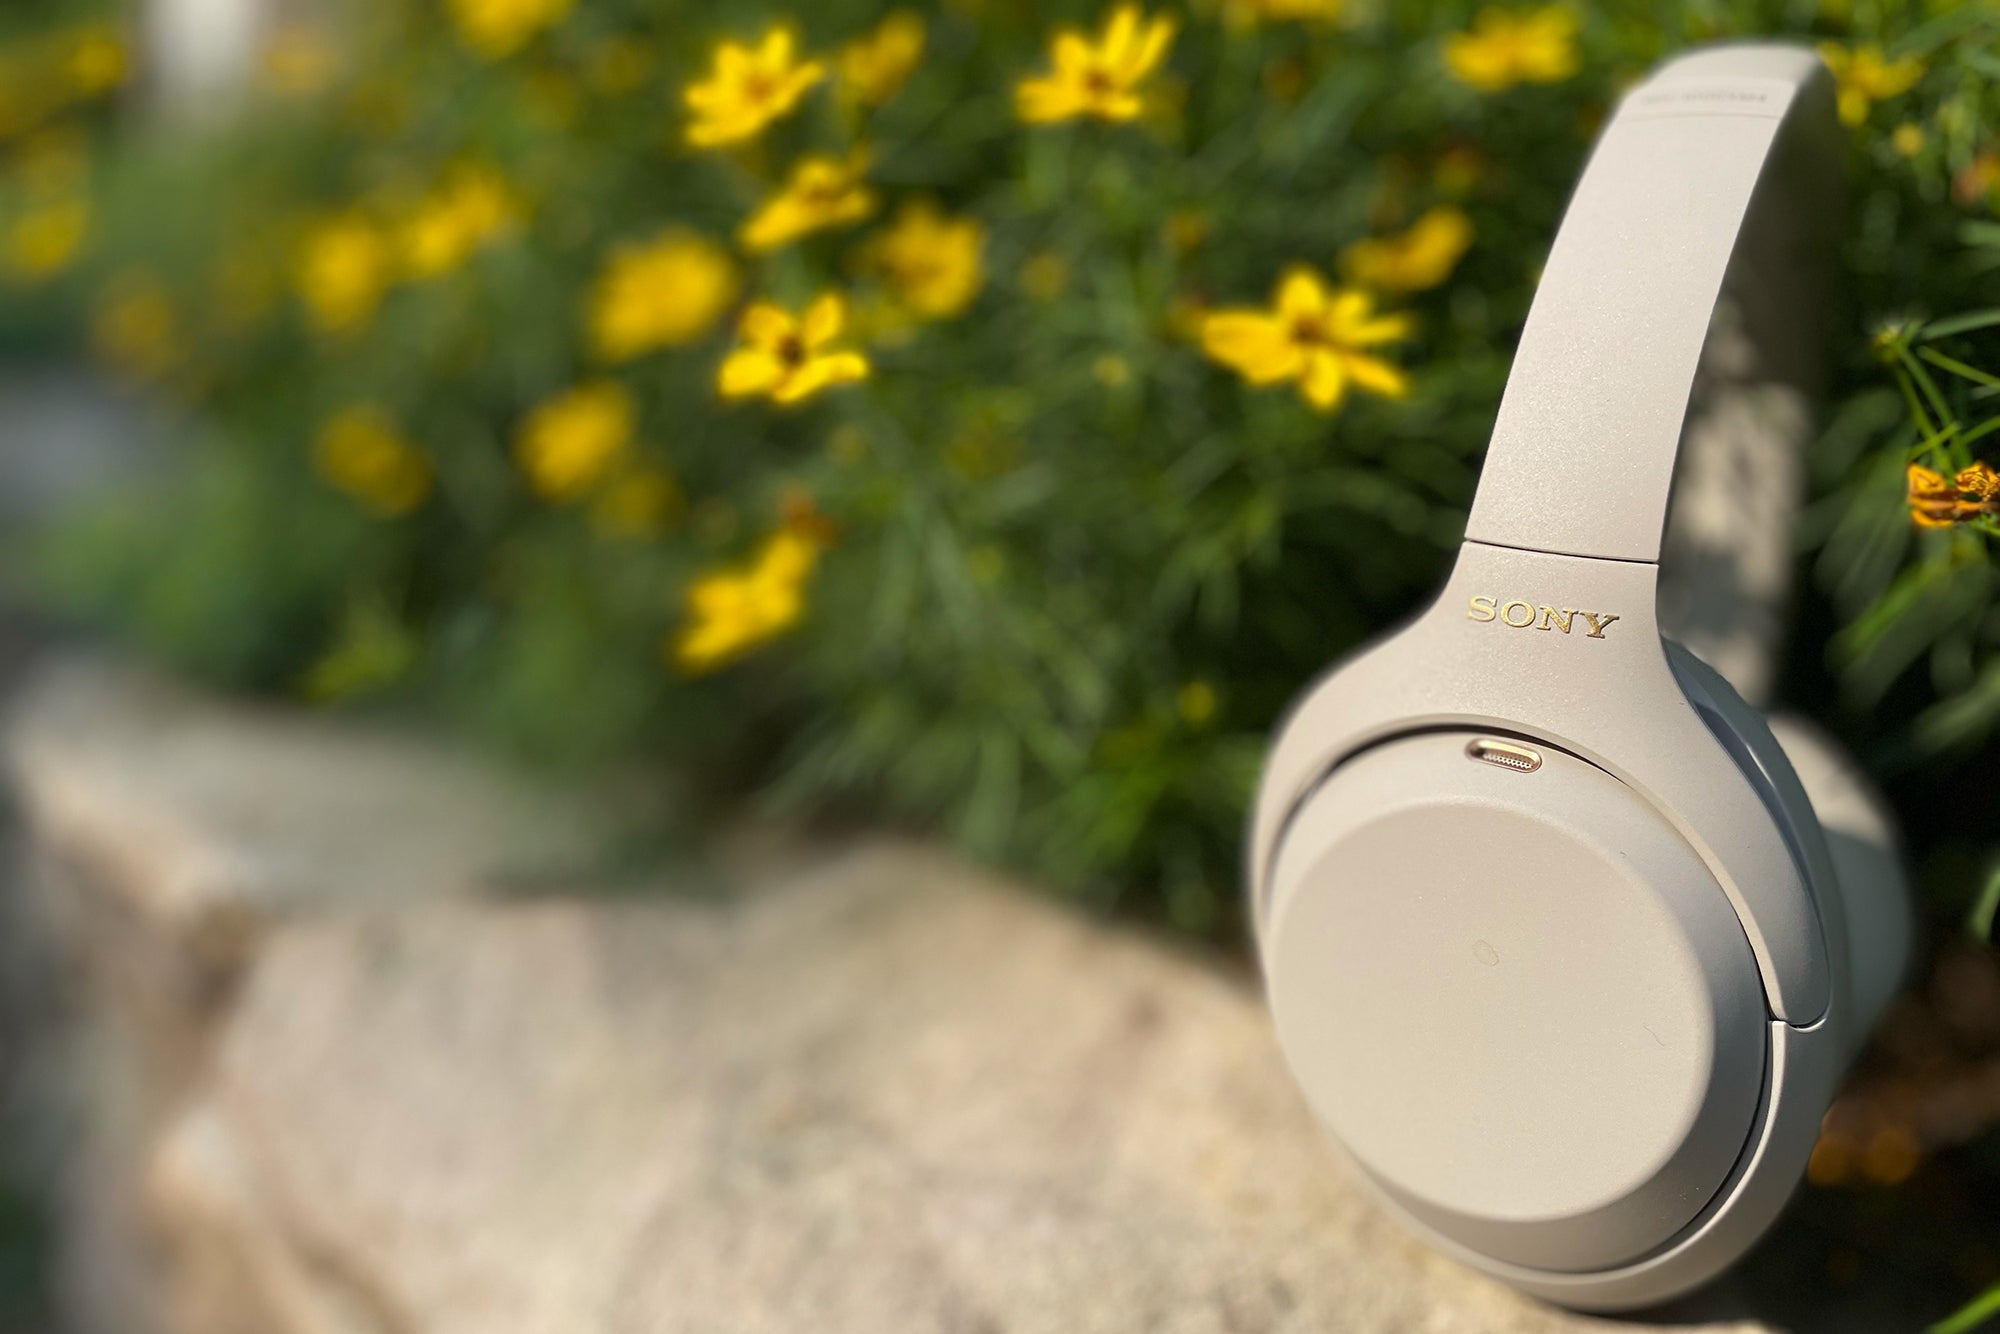 Sony WH-1000XM4 review: Noise-cancelling headphones you can live in